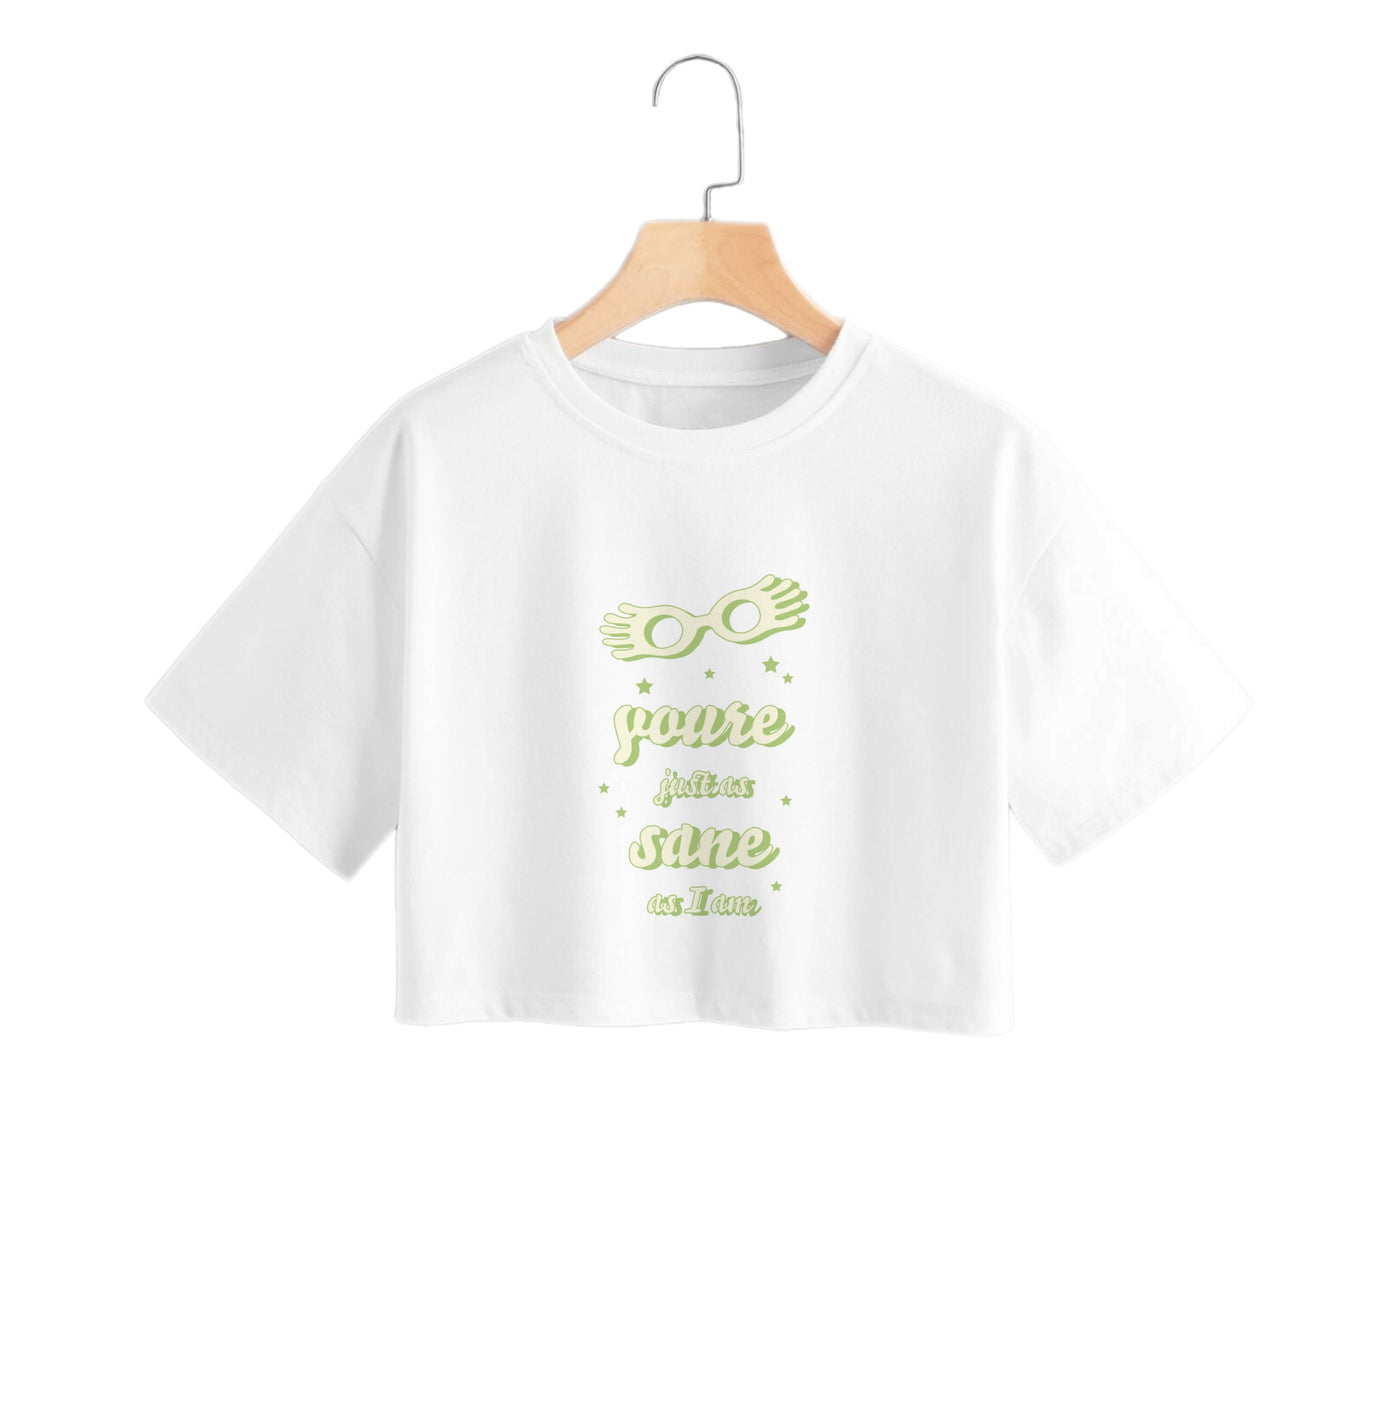 You're Just As Sane As I Am - Harry Potter Crop Top